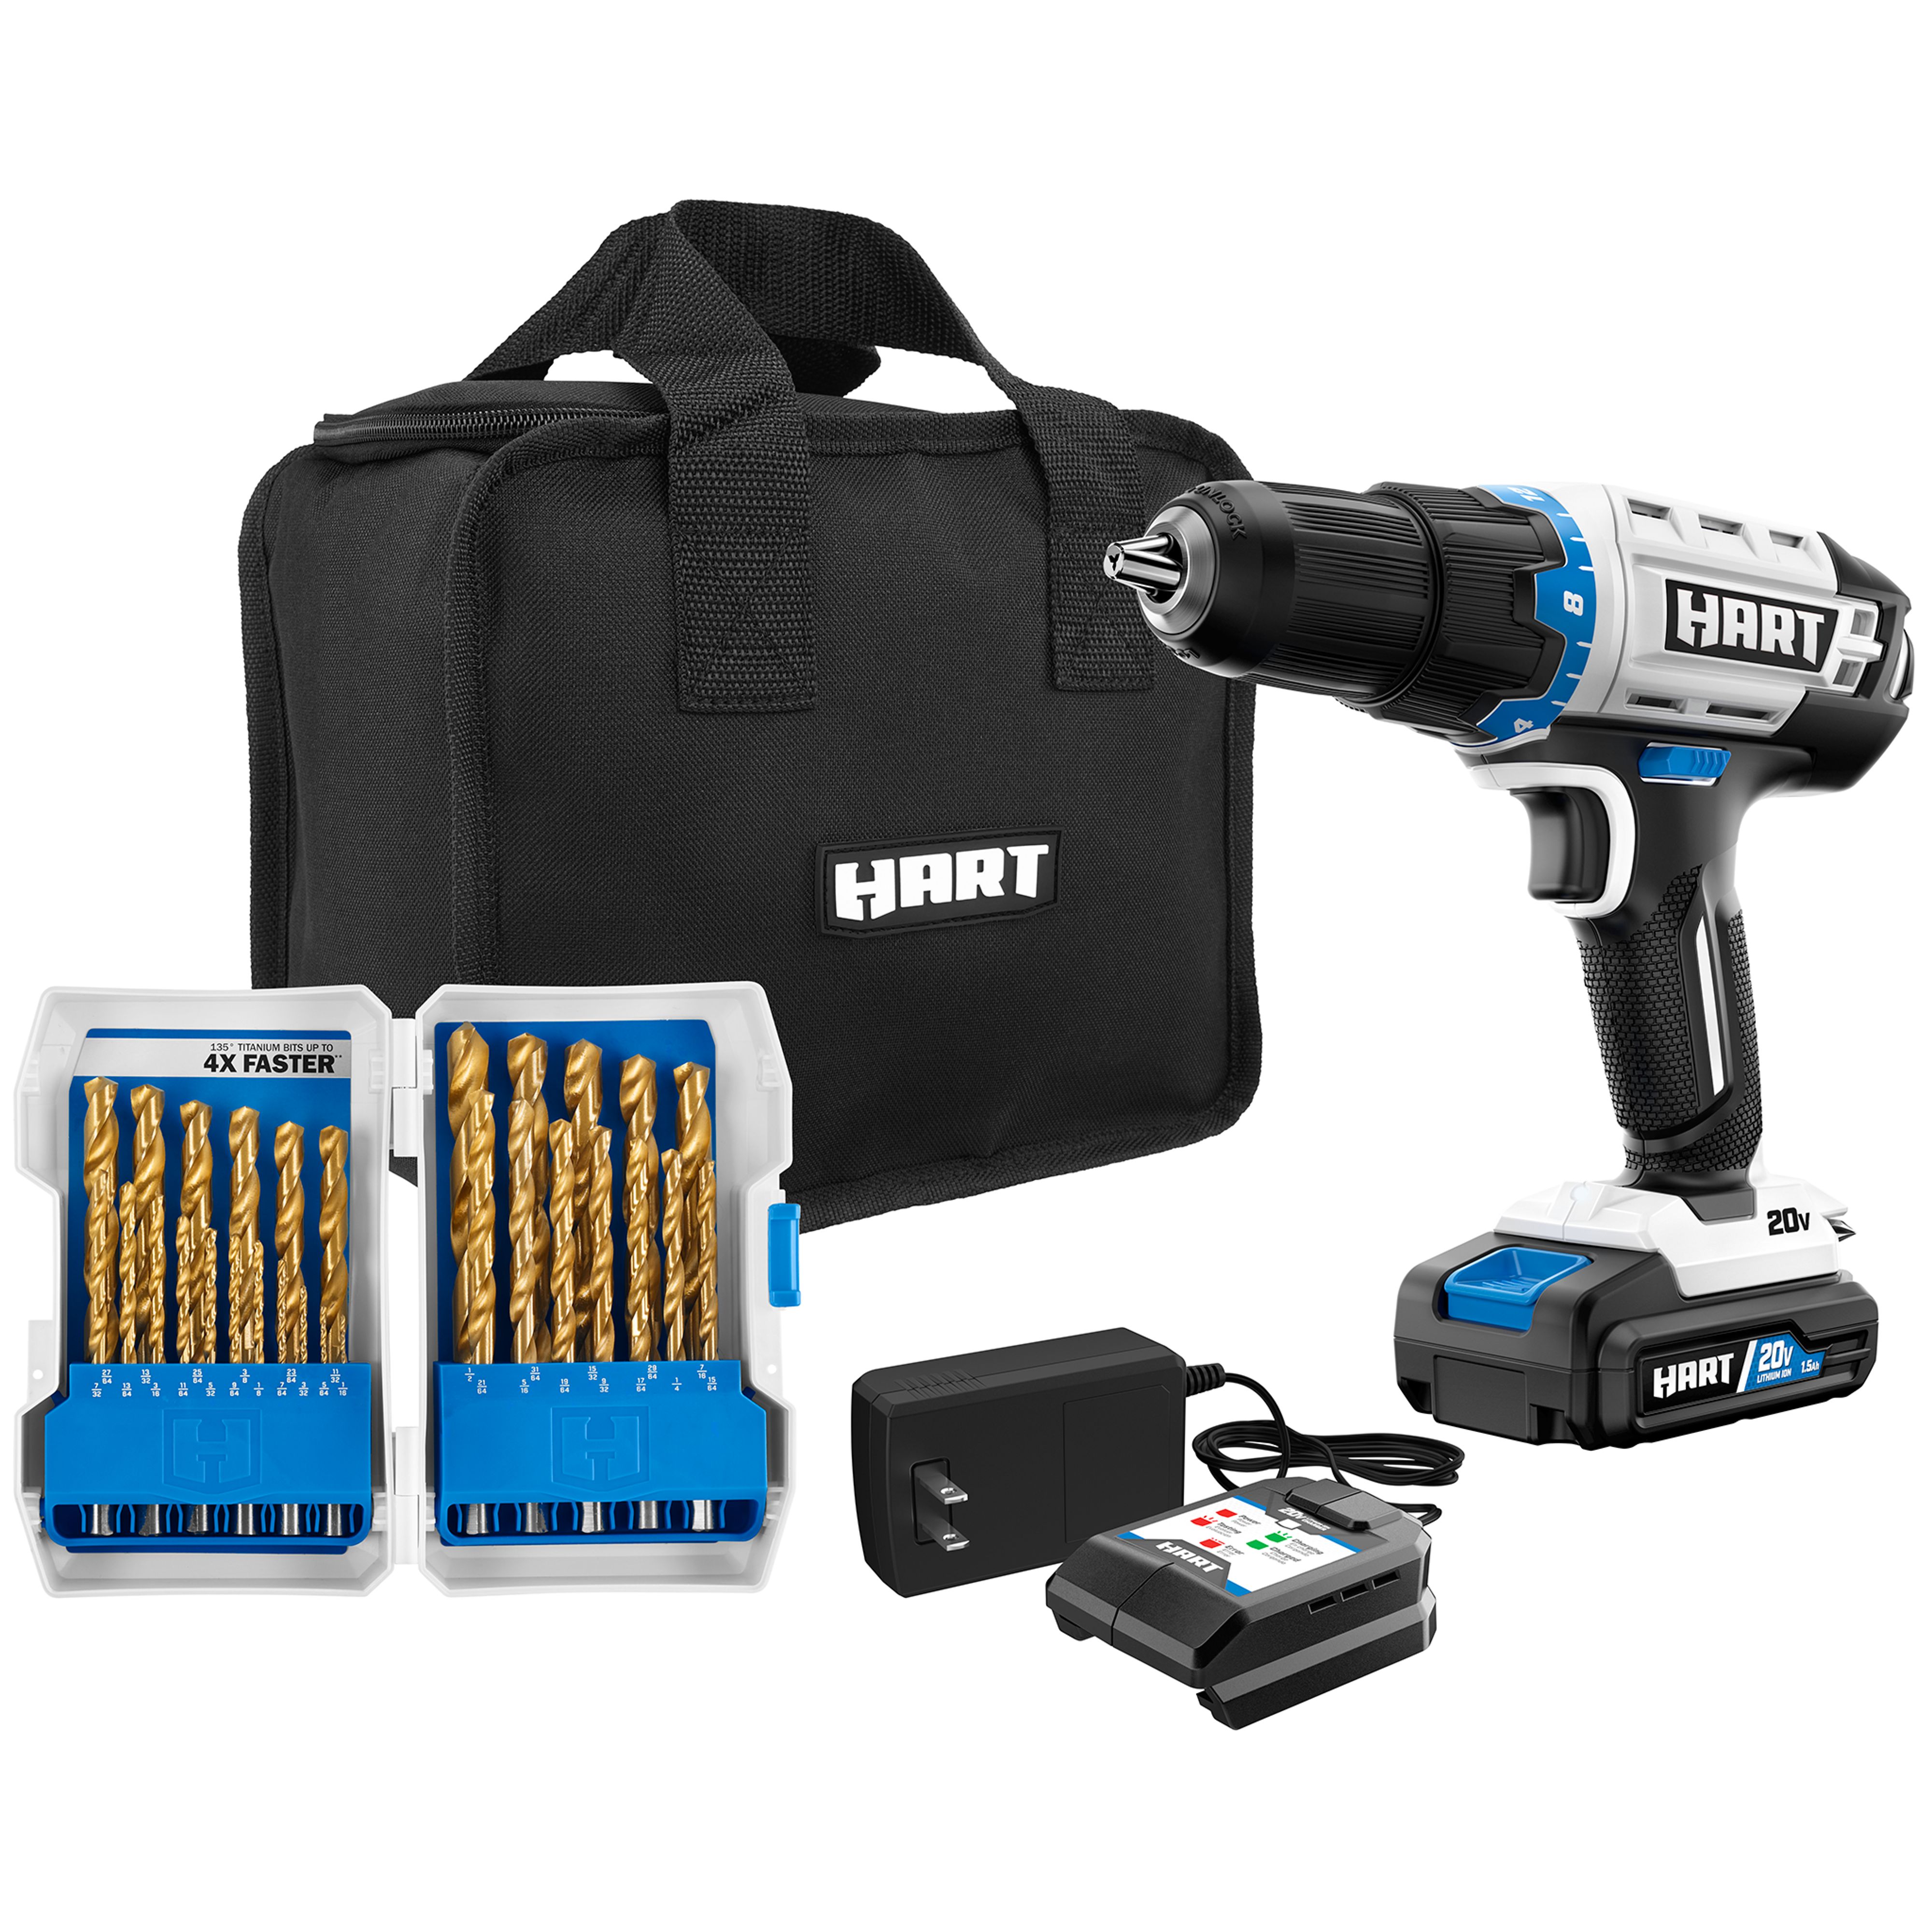 HART 20-Volt Cordless 1/2-inch Drill Kit with 29-Piece Accessory and 10-inch Storage Bag, (1) 1.5Ah Lithium-Ion Battery - image 1 of 19